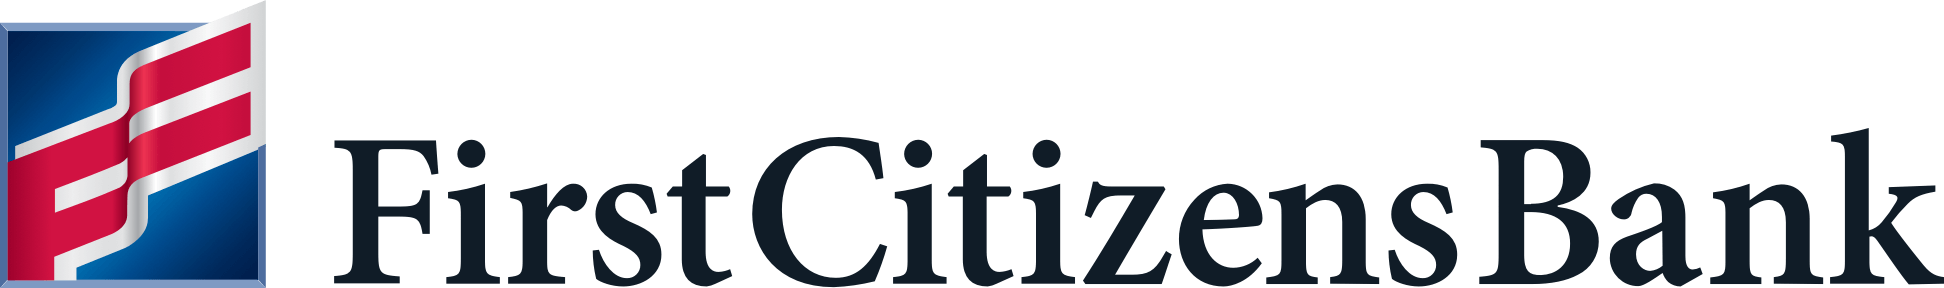 First Citizens Bank and Trust Company